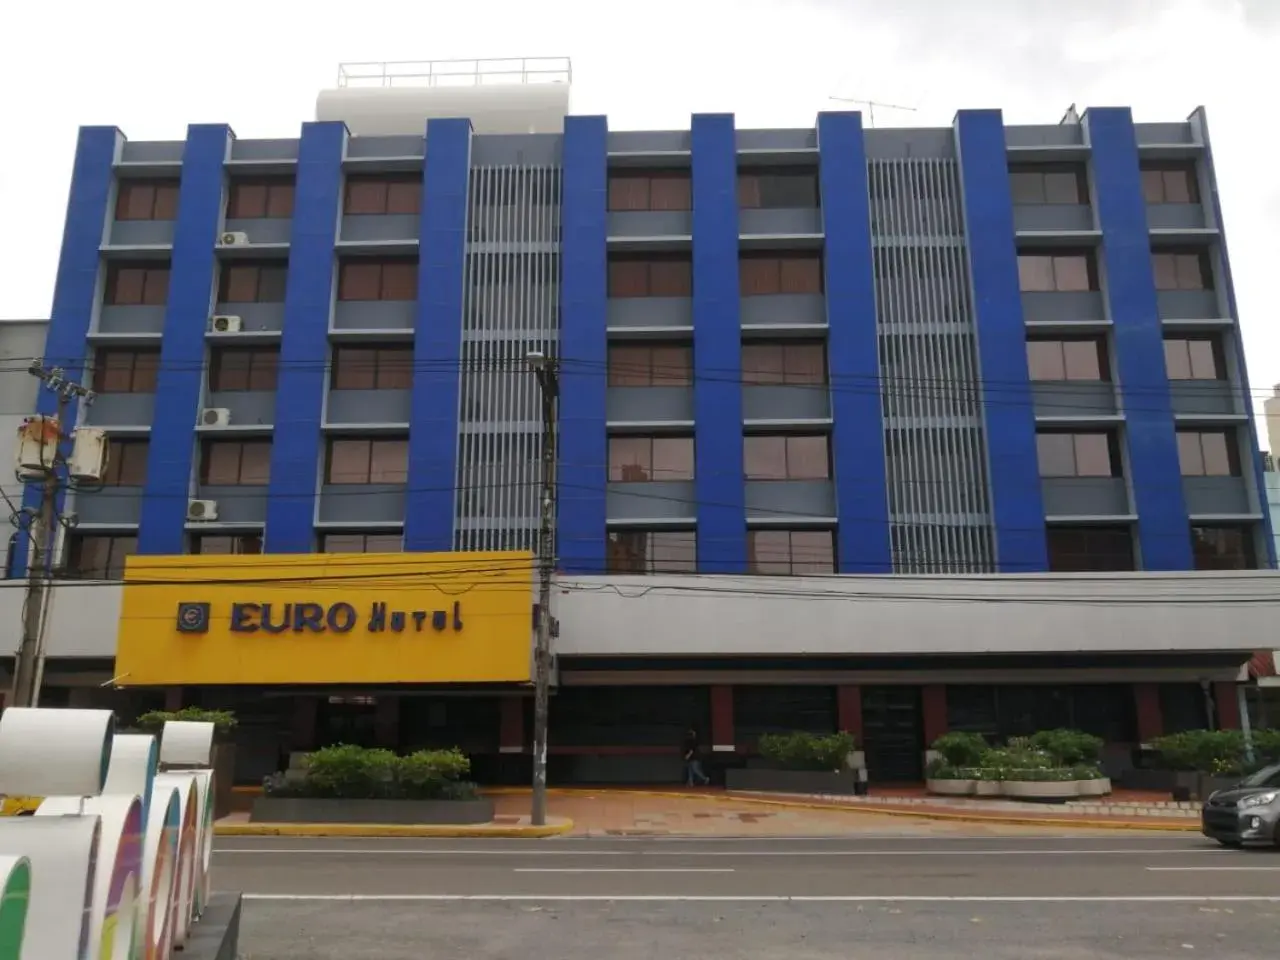 Property Building in Eurohotel